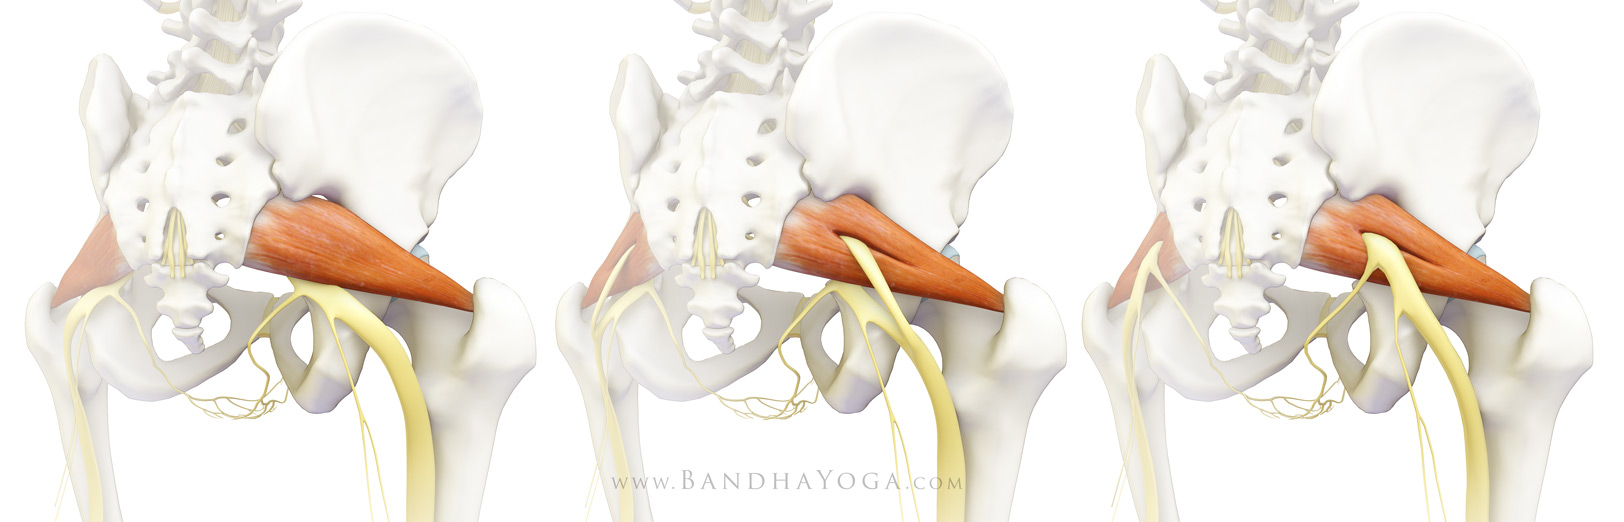 Yoga postures to relieve sciatica pain in piriformis syndrome